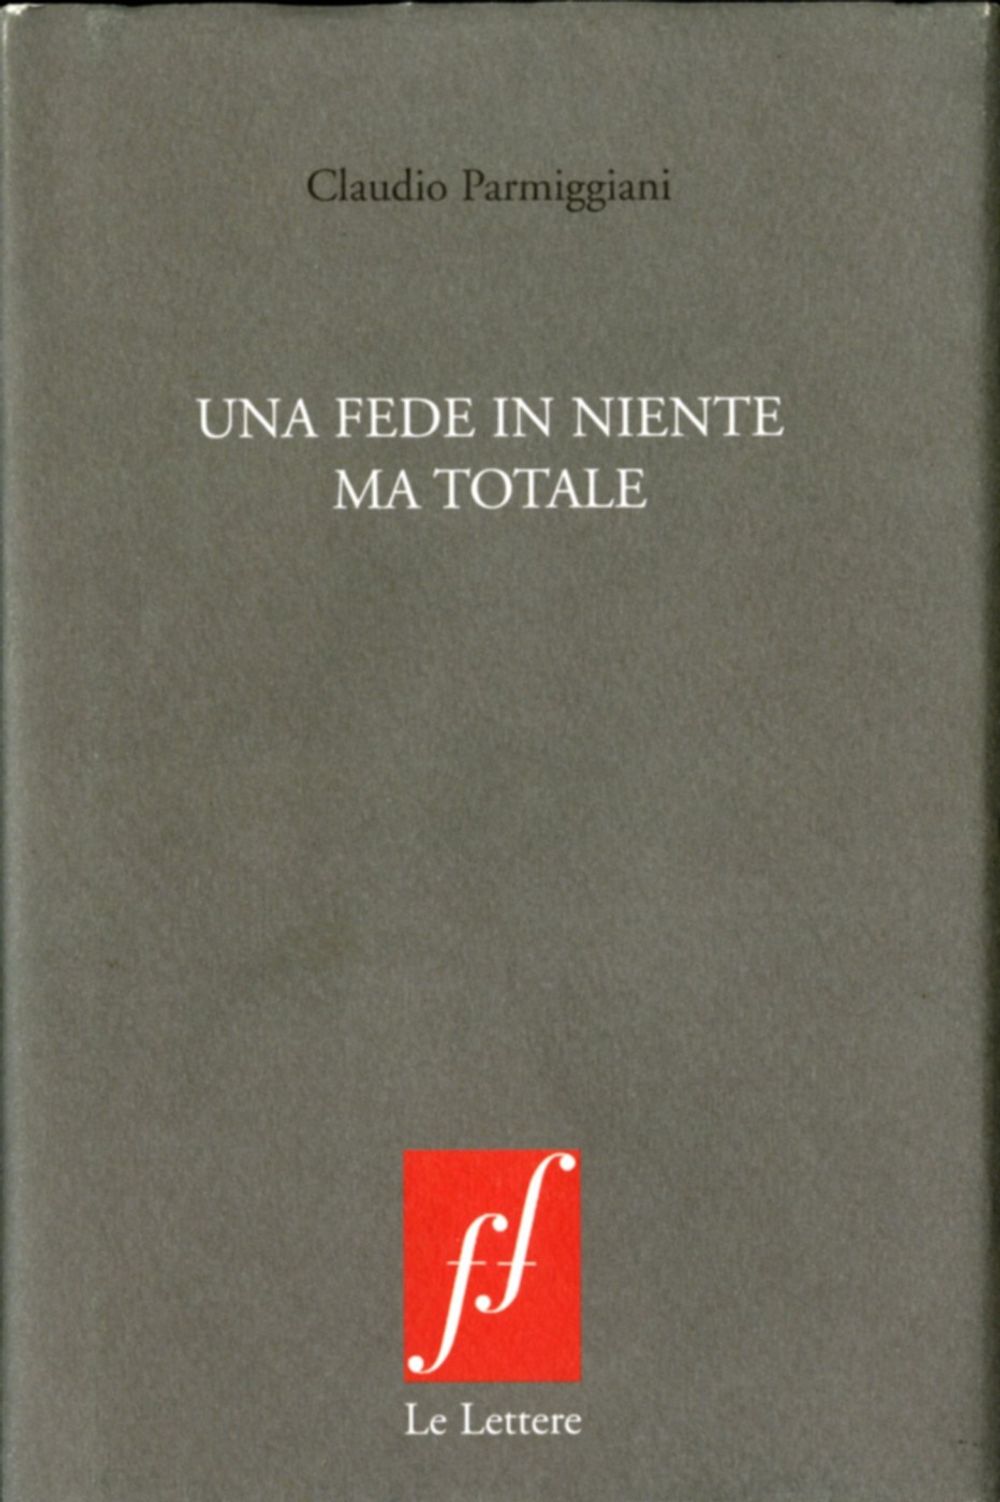 Book cover on plain gray background with title of Una Fede in Niente Ma Totale